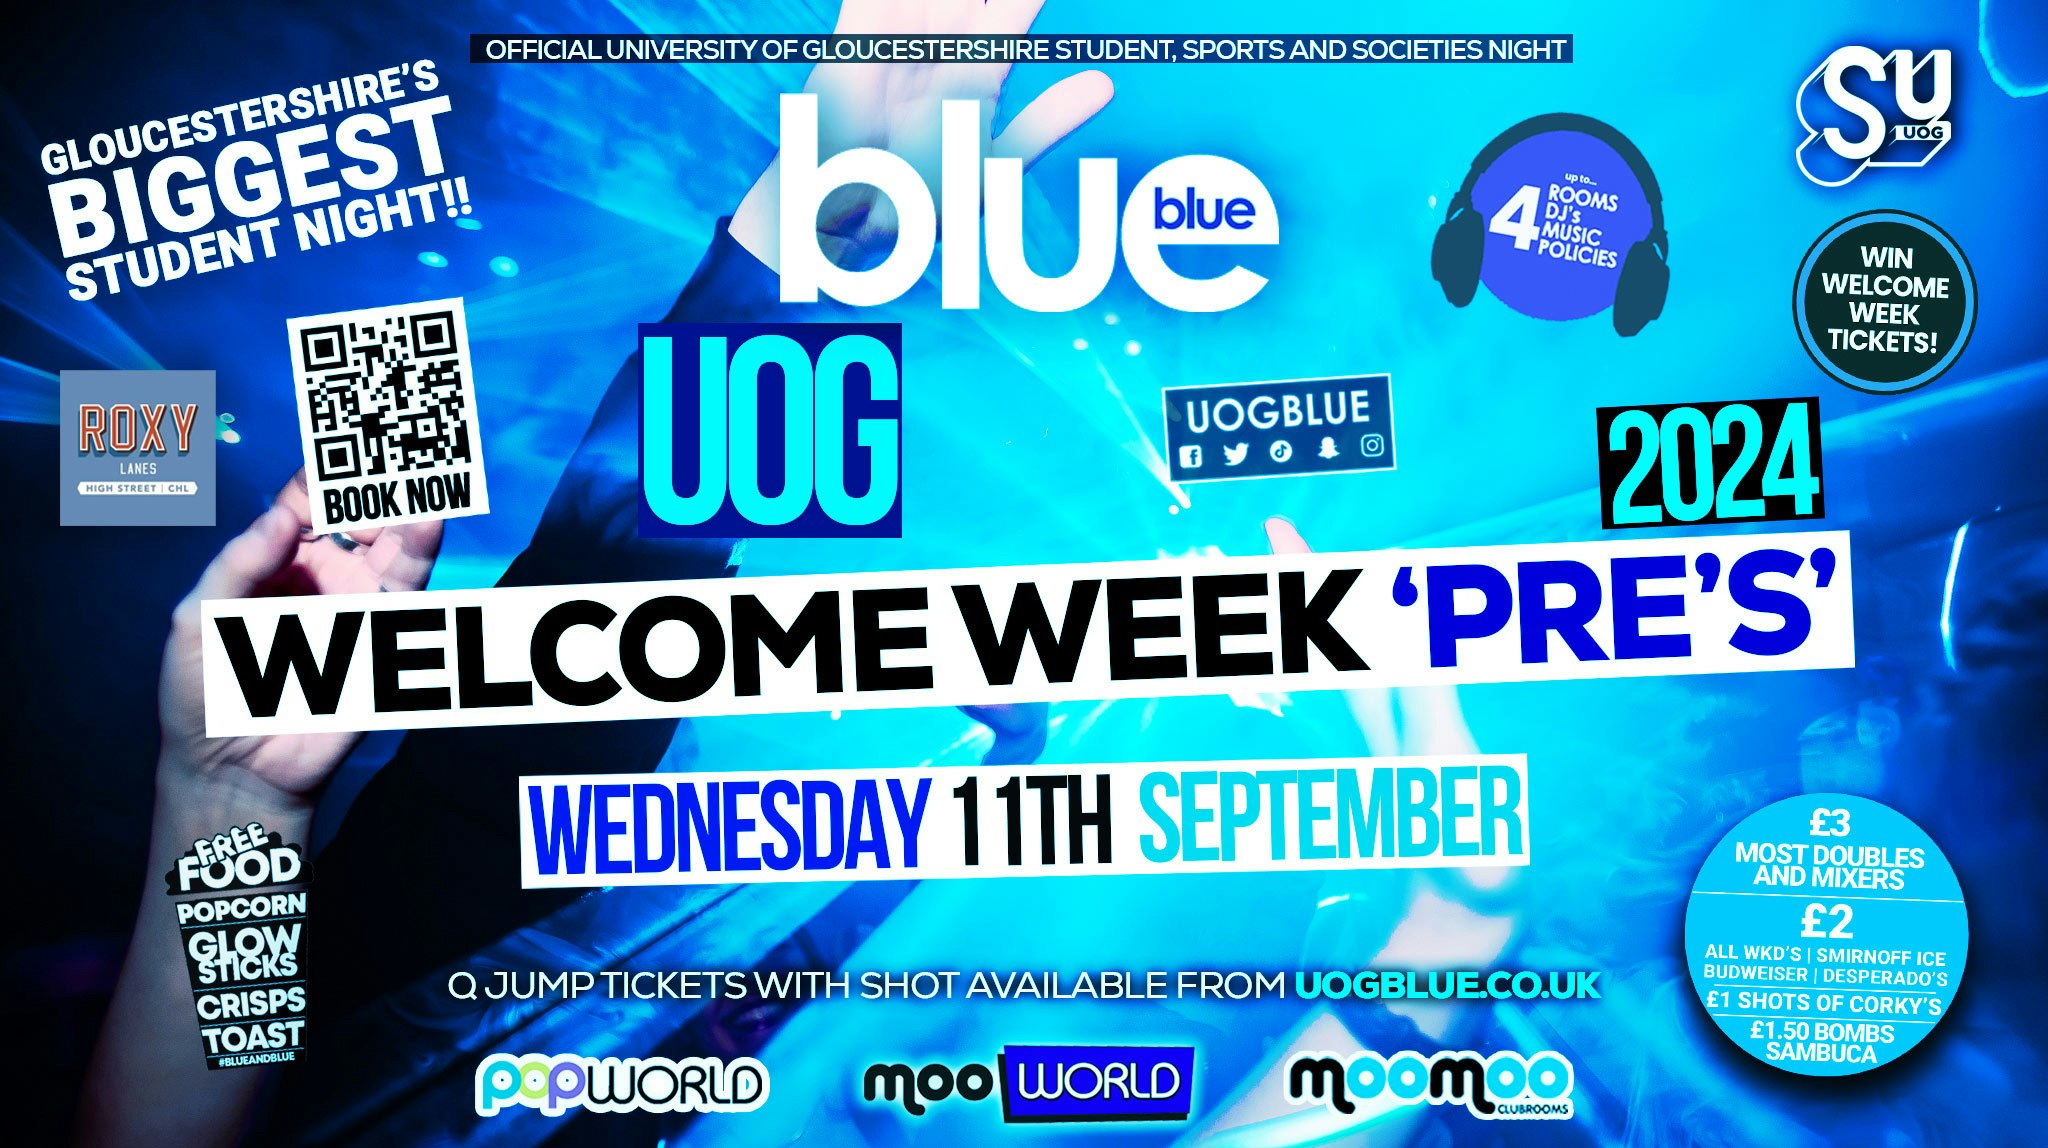 Blue and Blue – Gloucestershire’s Biggest Student Night 💙 £3 Tickets with Shot